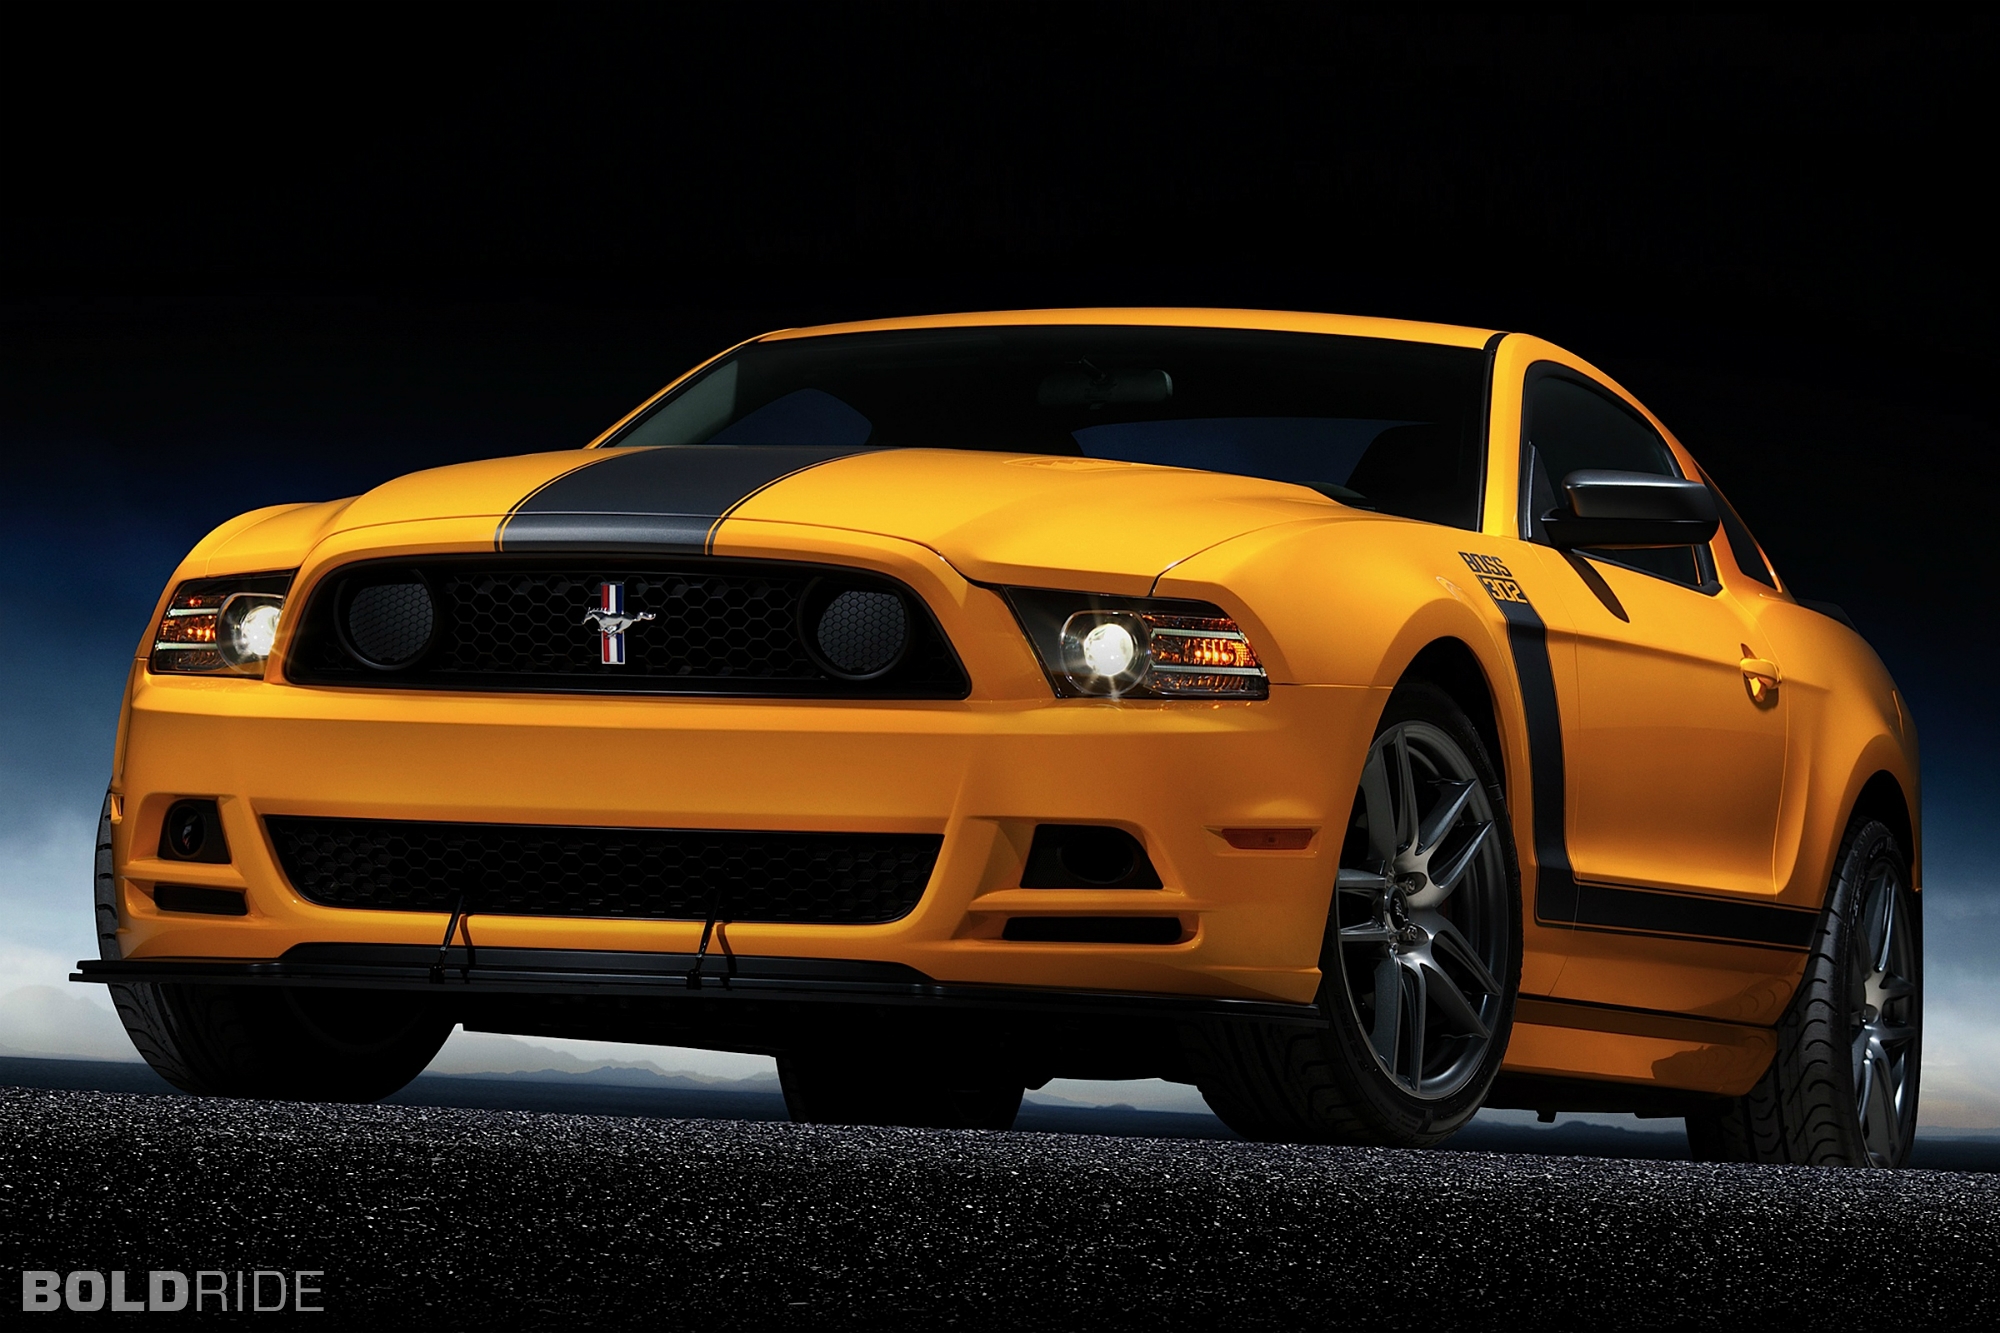 2013 Ford Mustang Boss 302 1920 x 1080